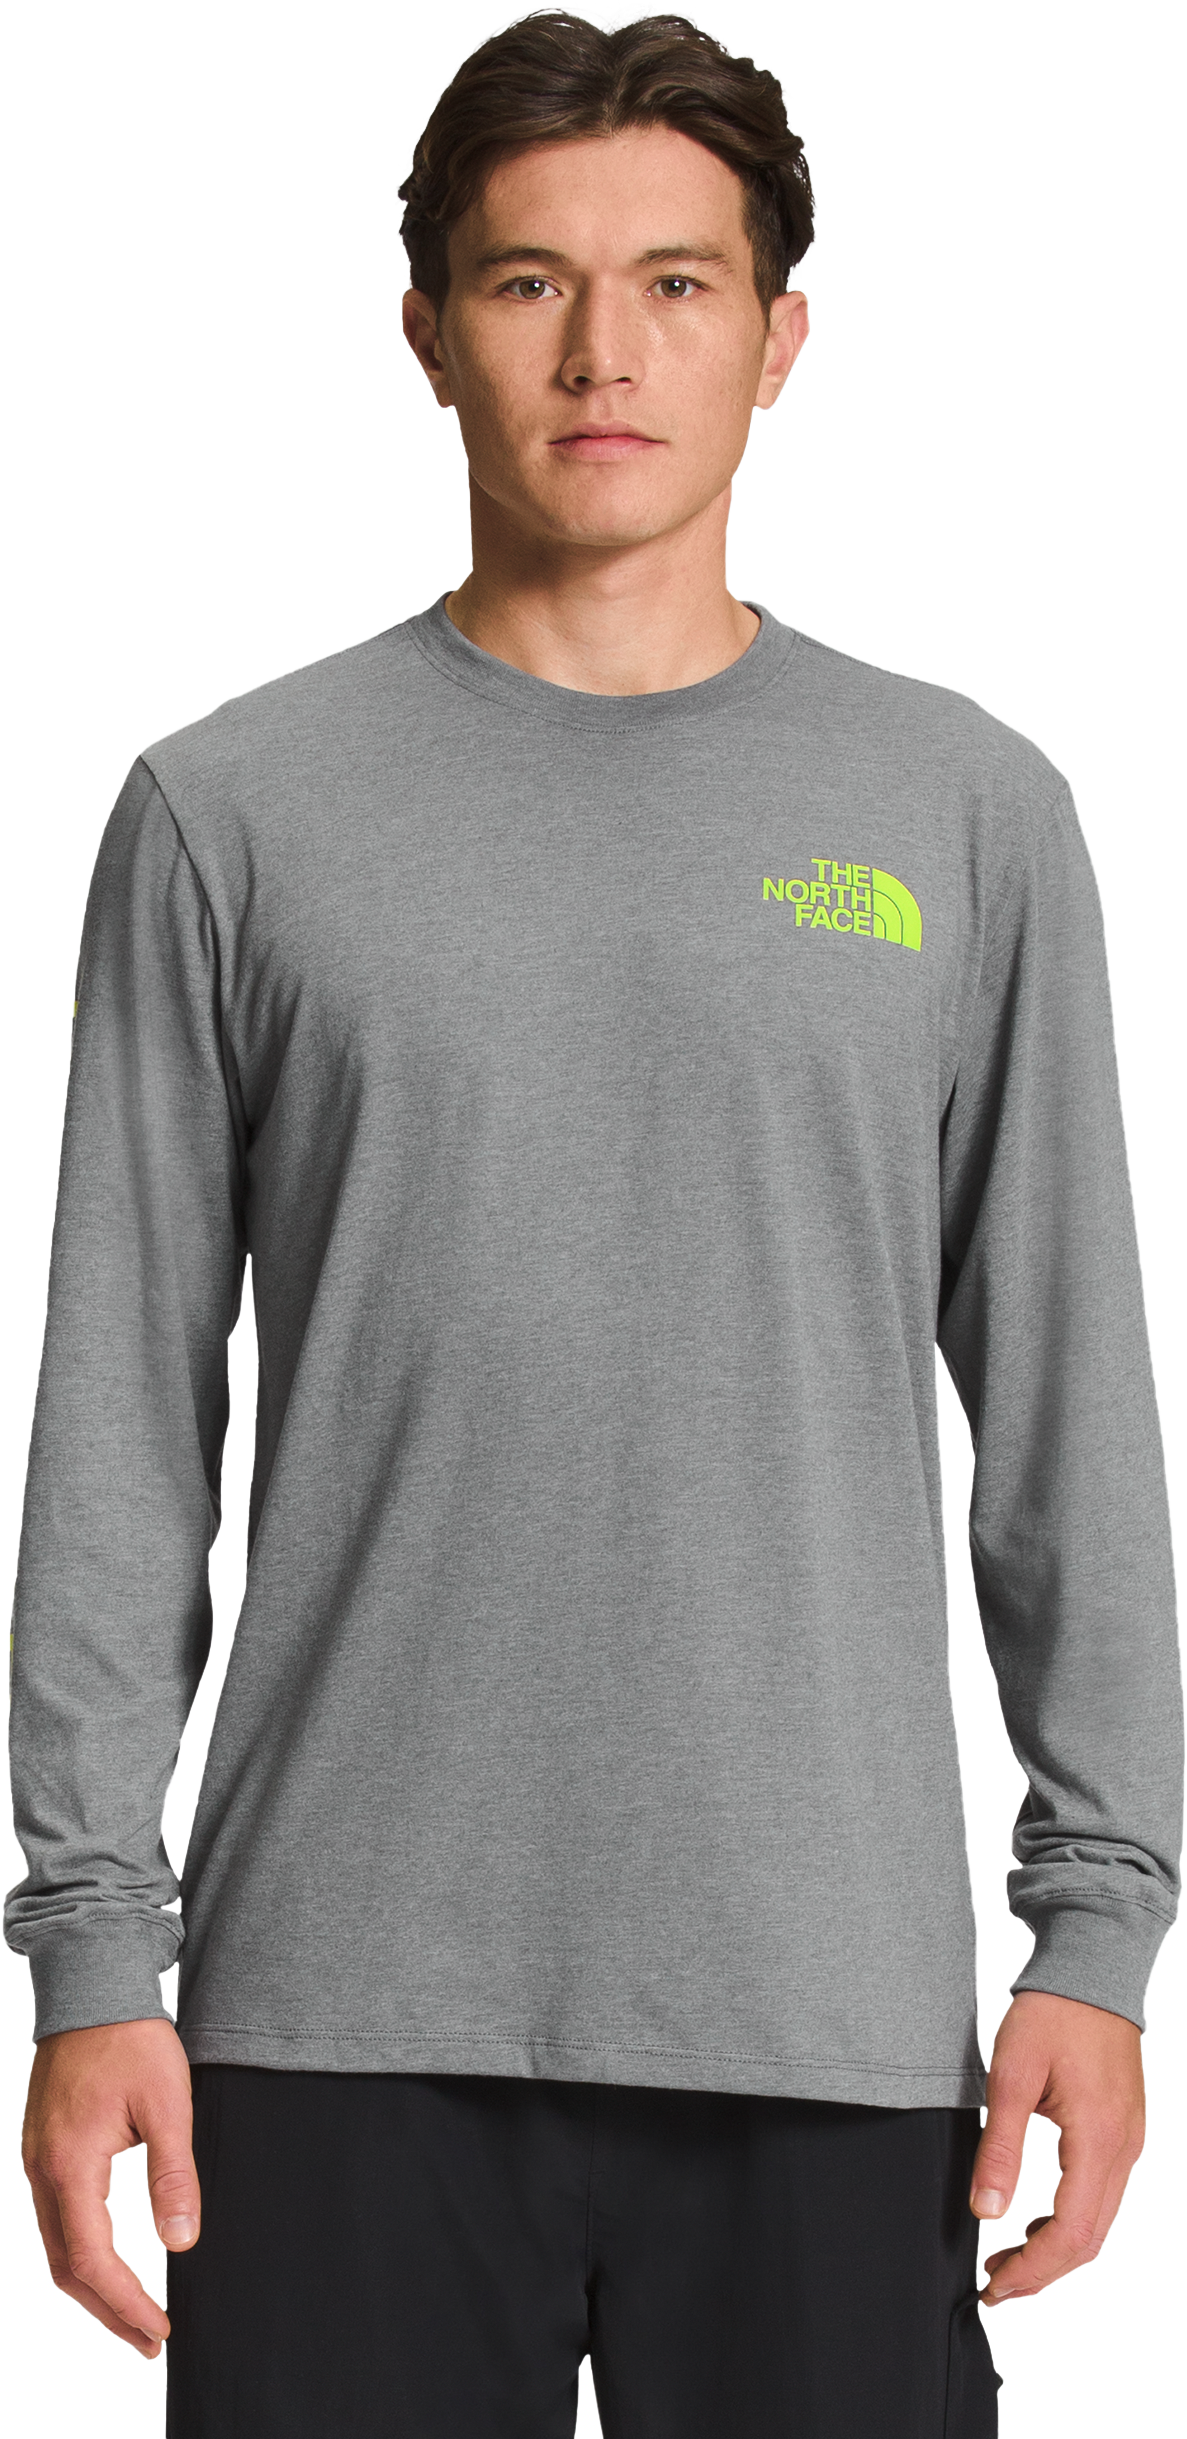 The North Face Hit Graphic Long-Sleeve T-Shirt for Men - TNF Medium Grey Heather/LED Yellow - XL